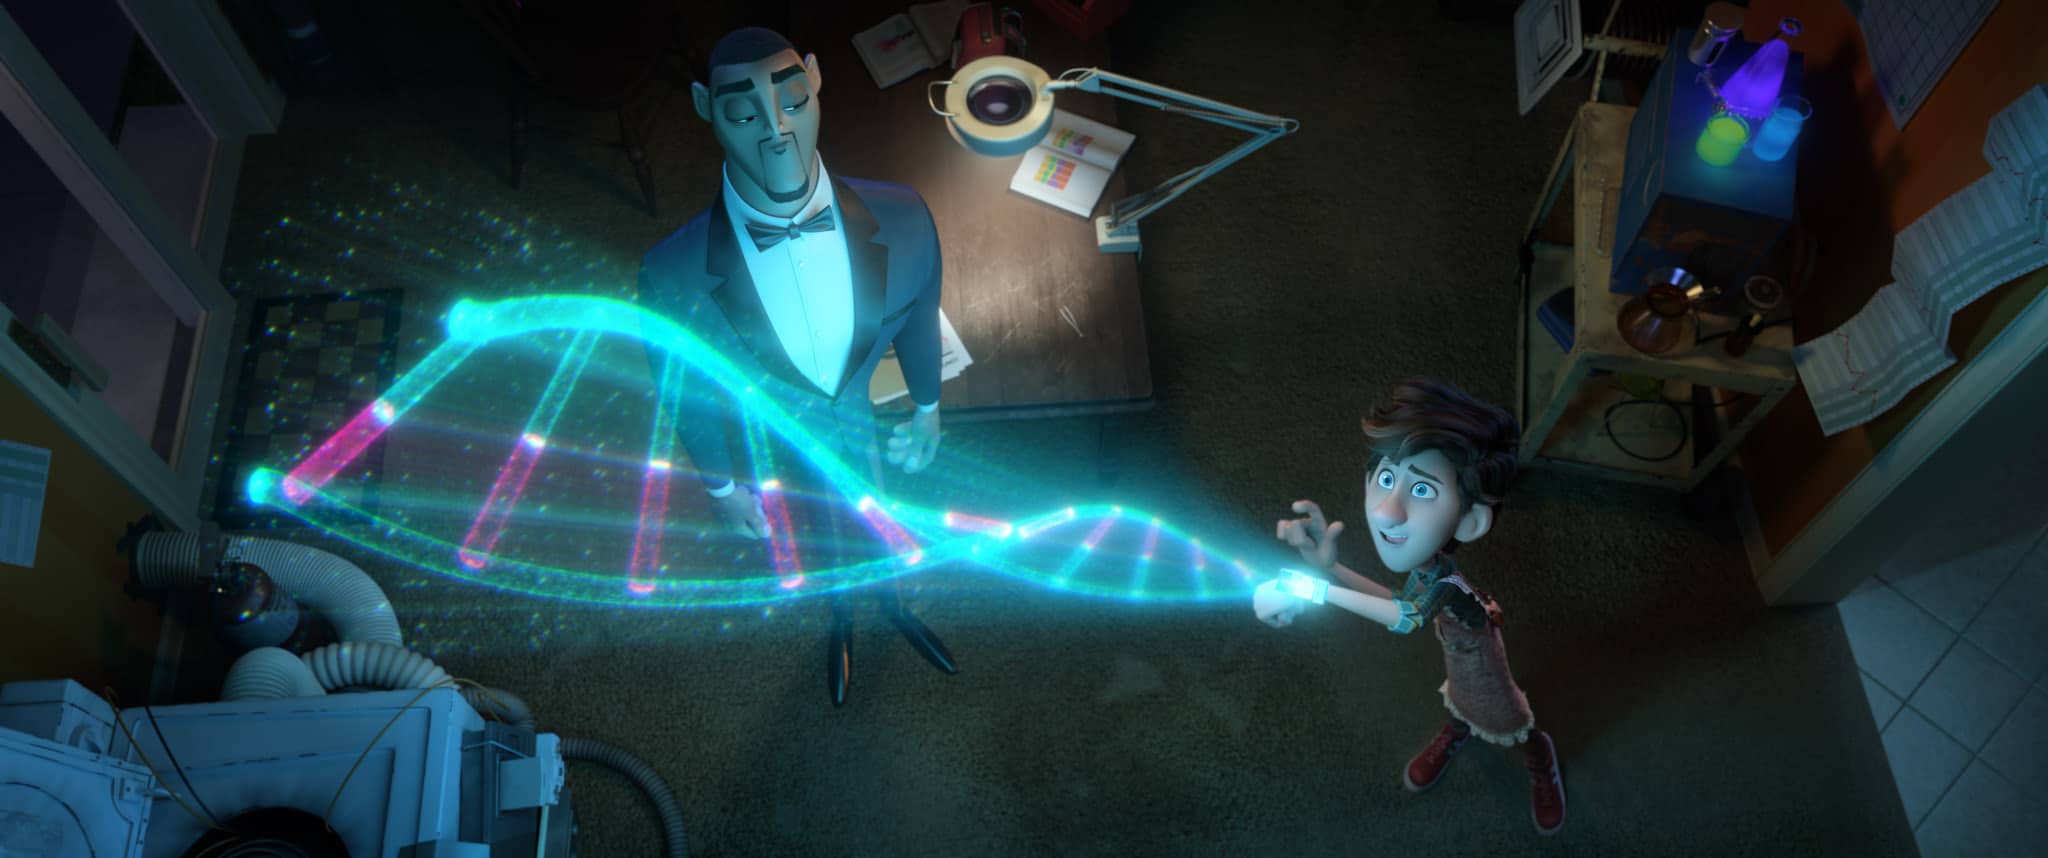 Dna from Spies in Disguise